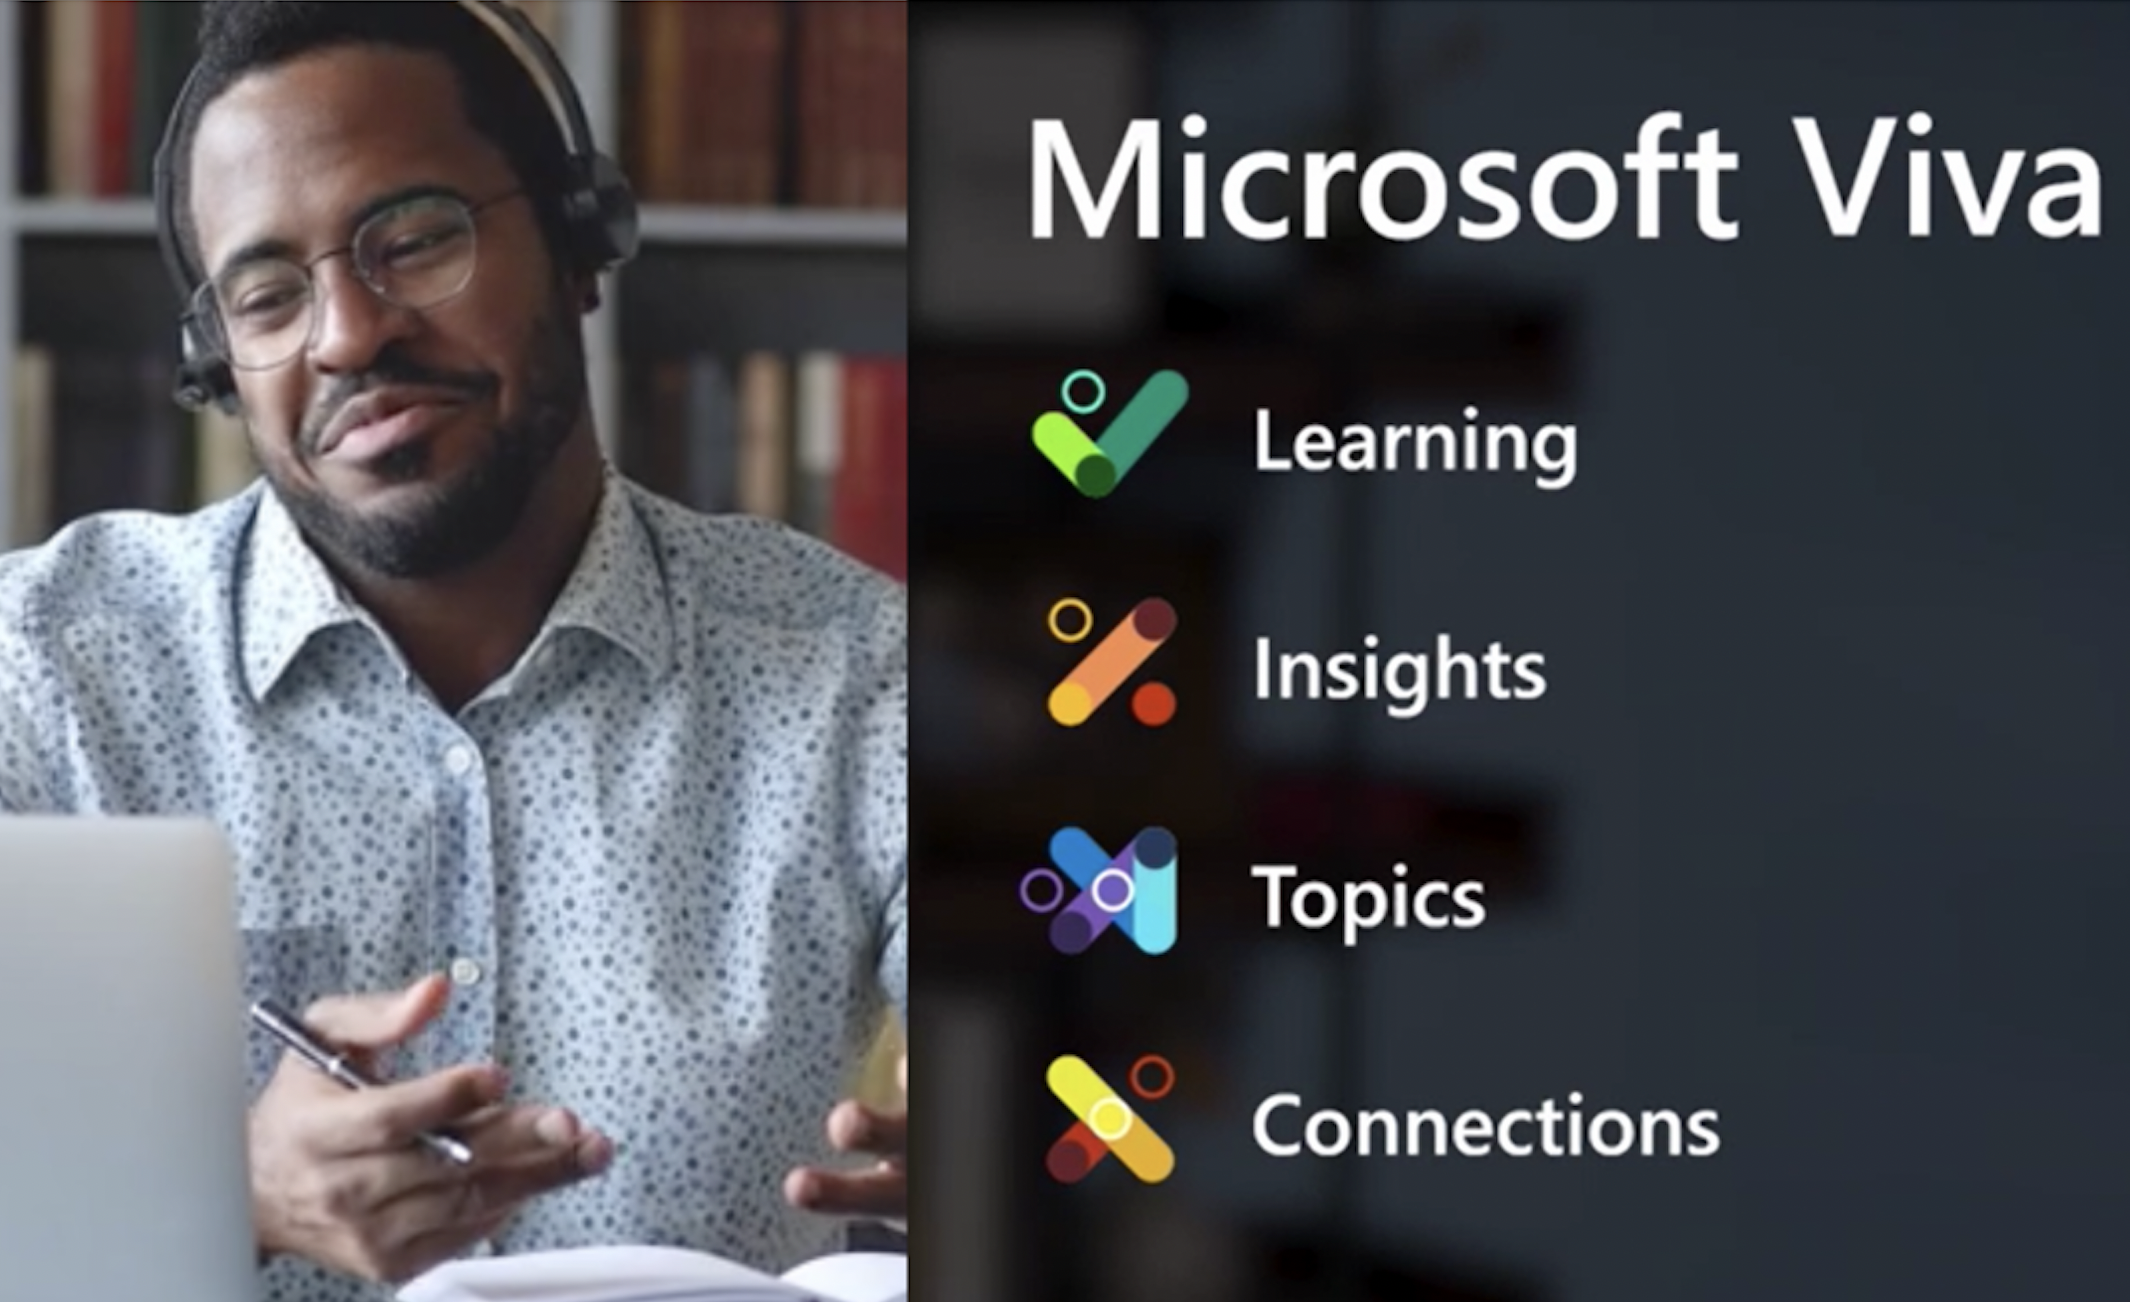 Watch this video about Microsoft Viva.